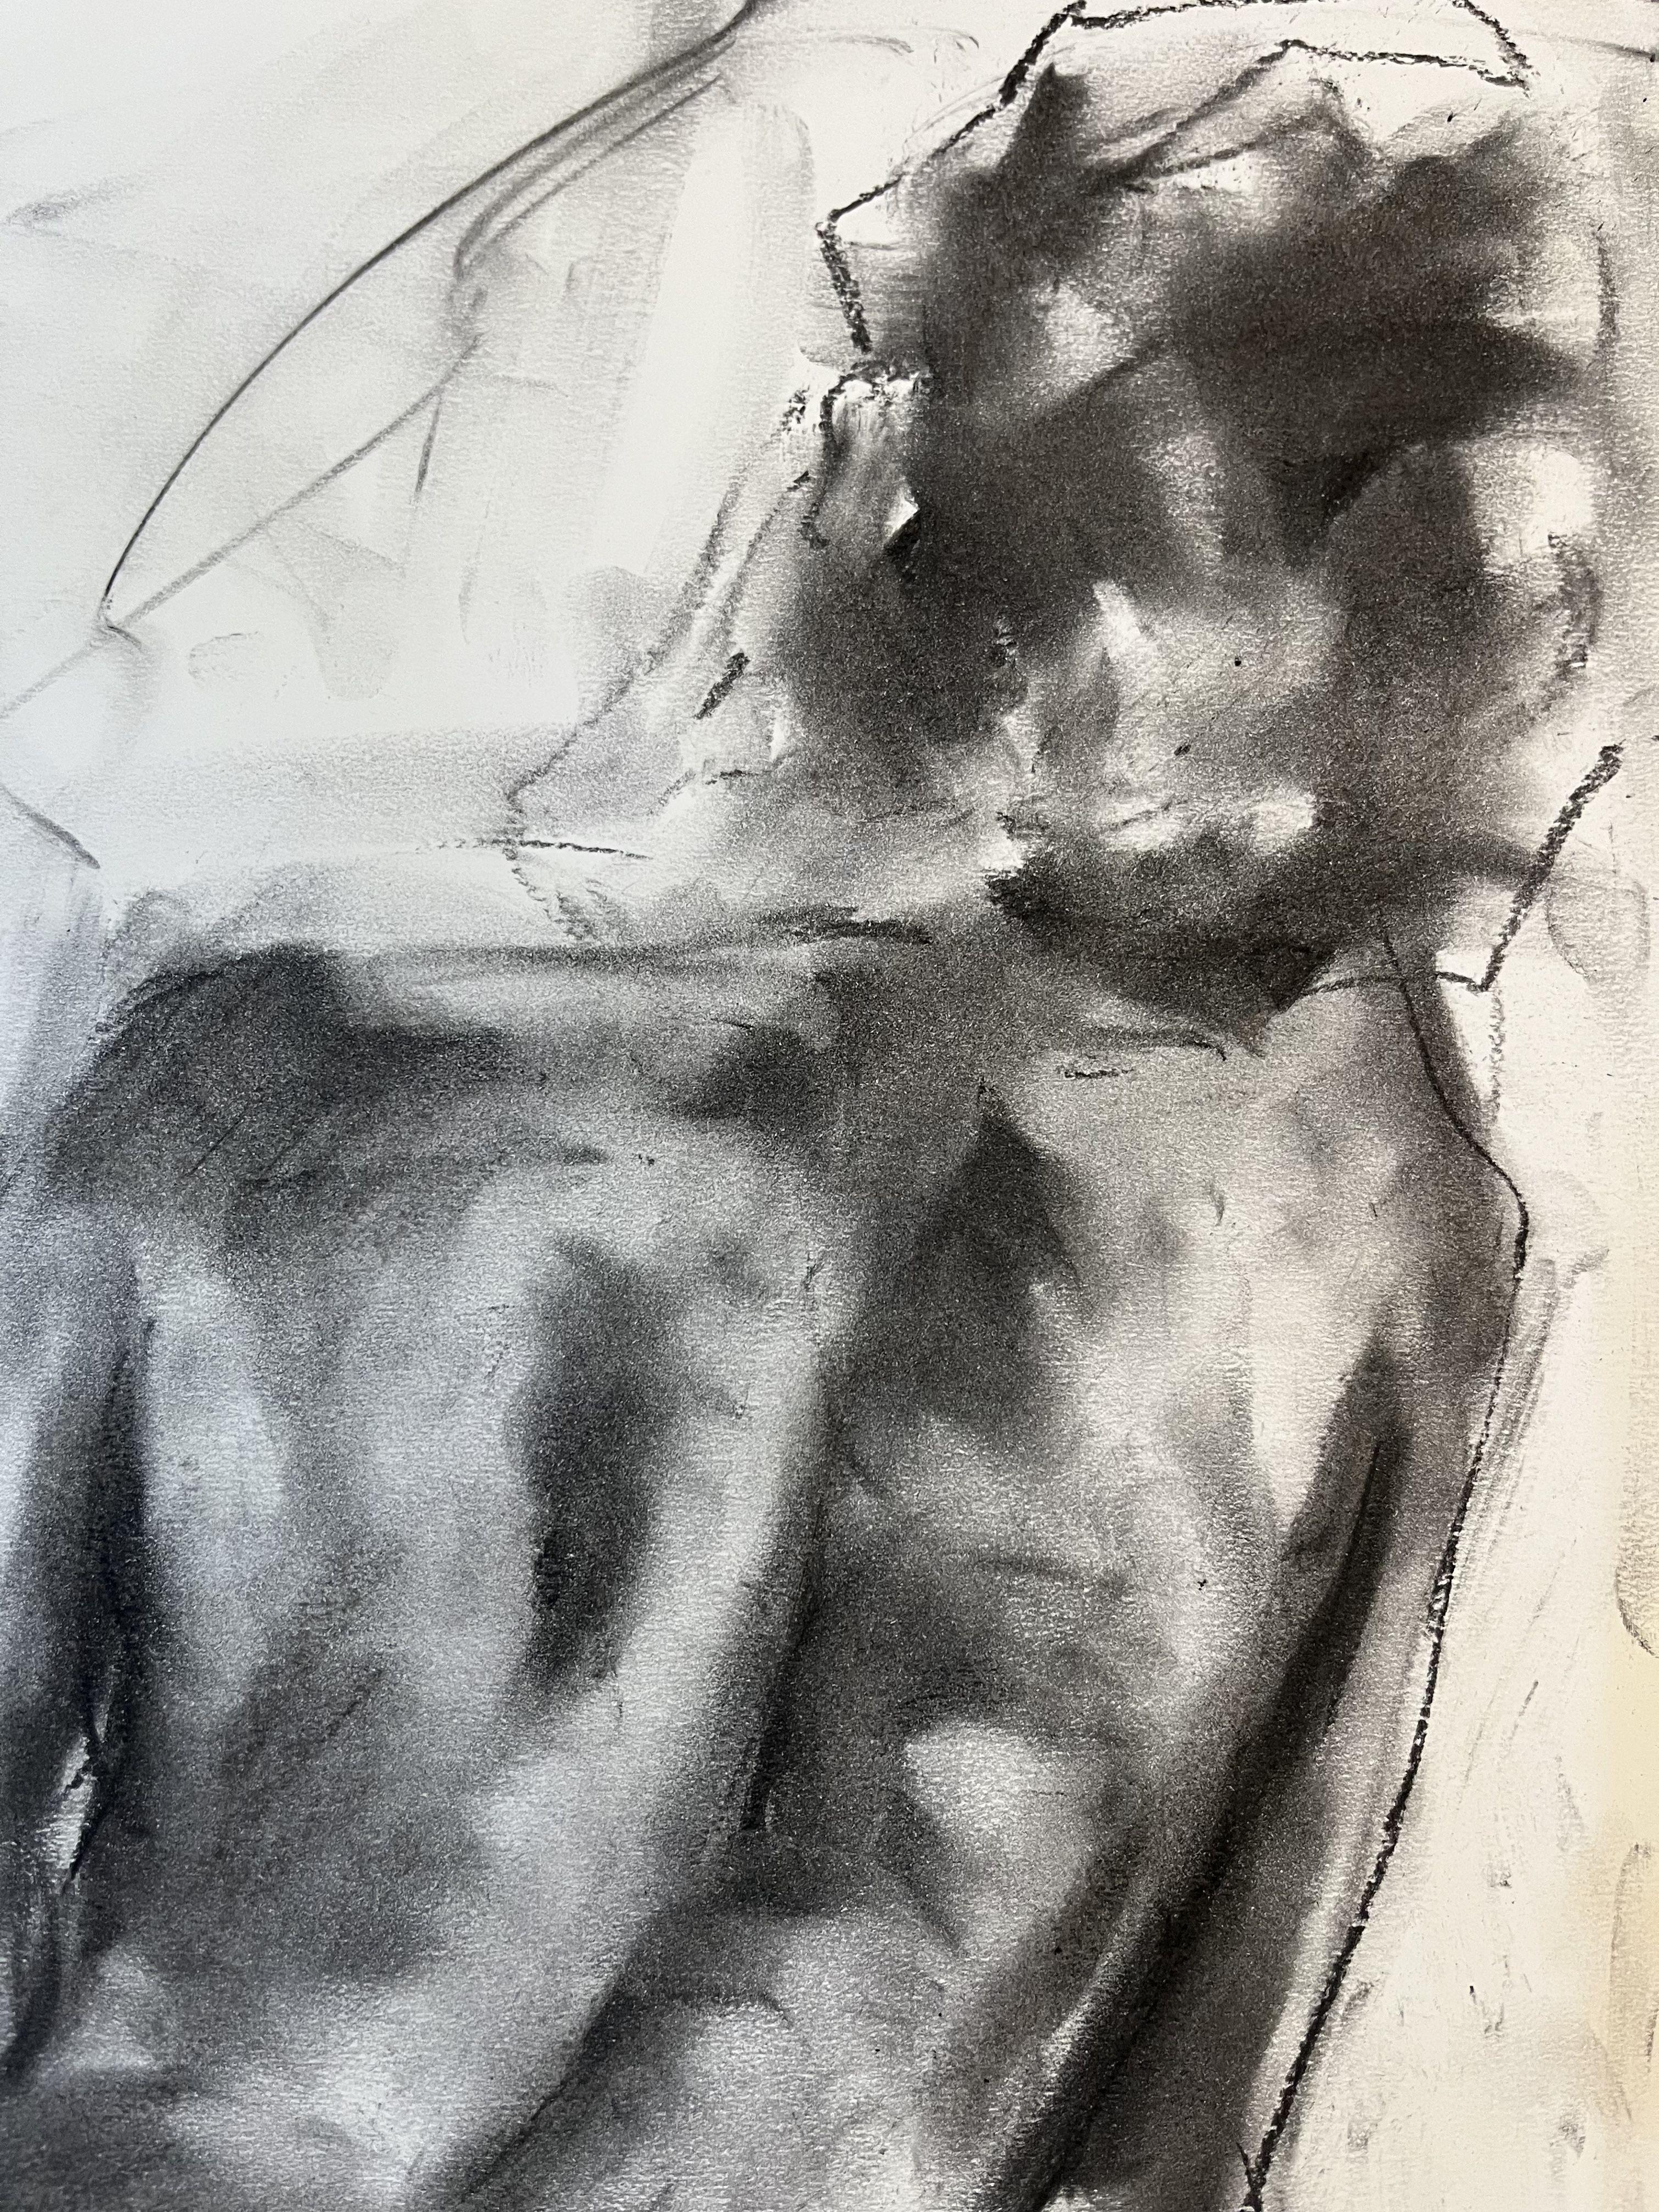 Ask, Drawing, Charcoal on Paper - Impressionist Art by James Shipton